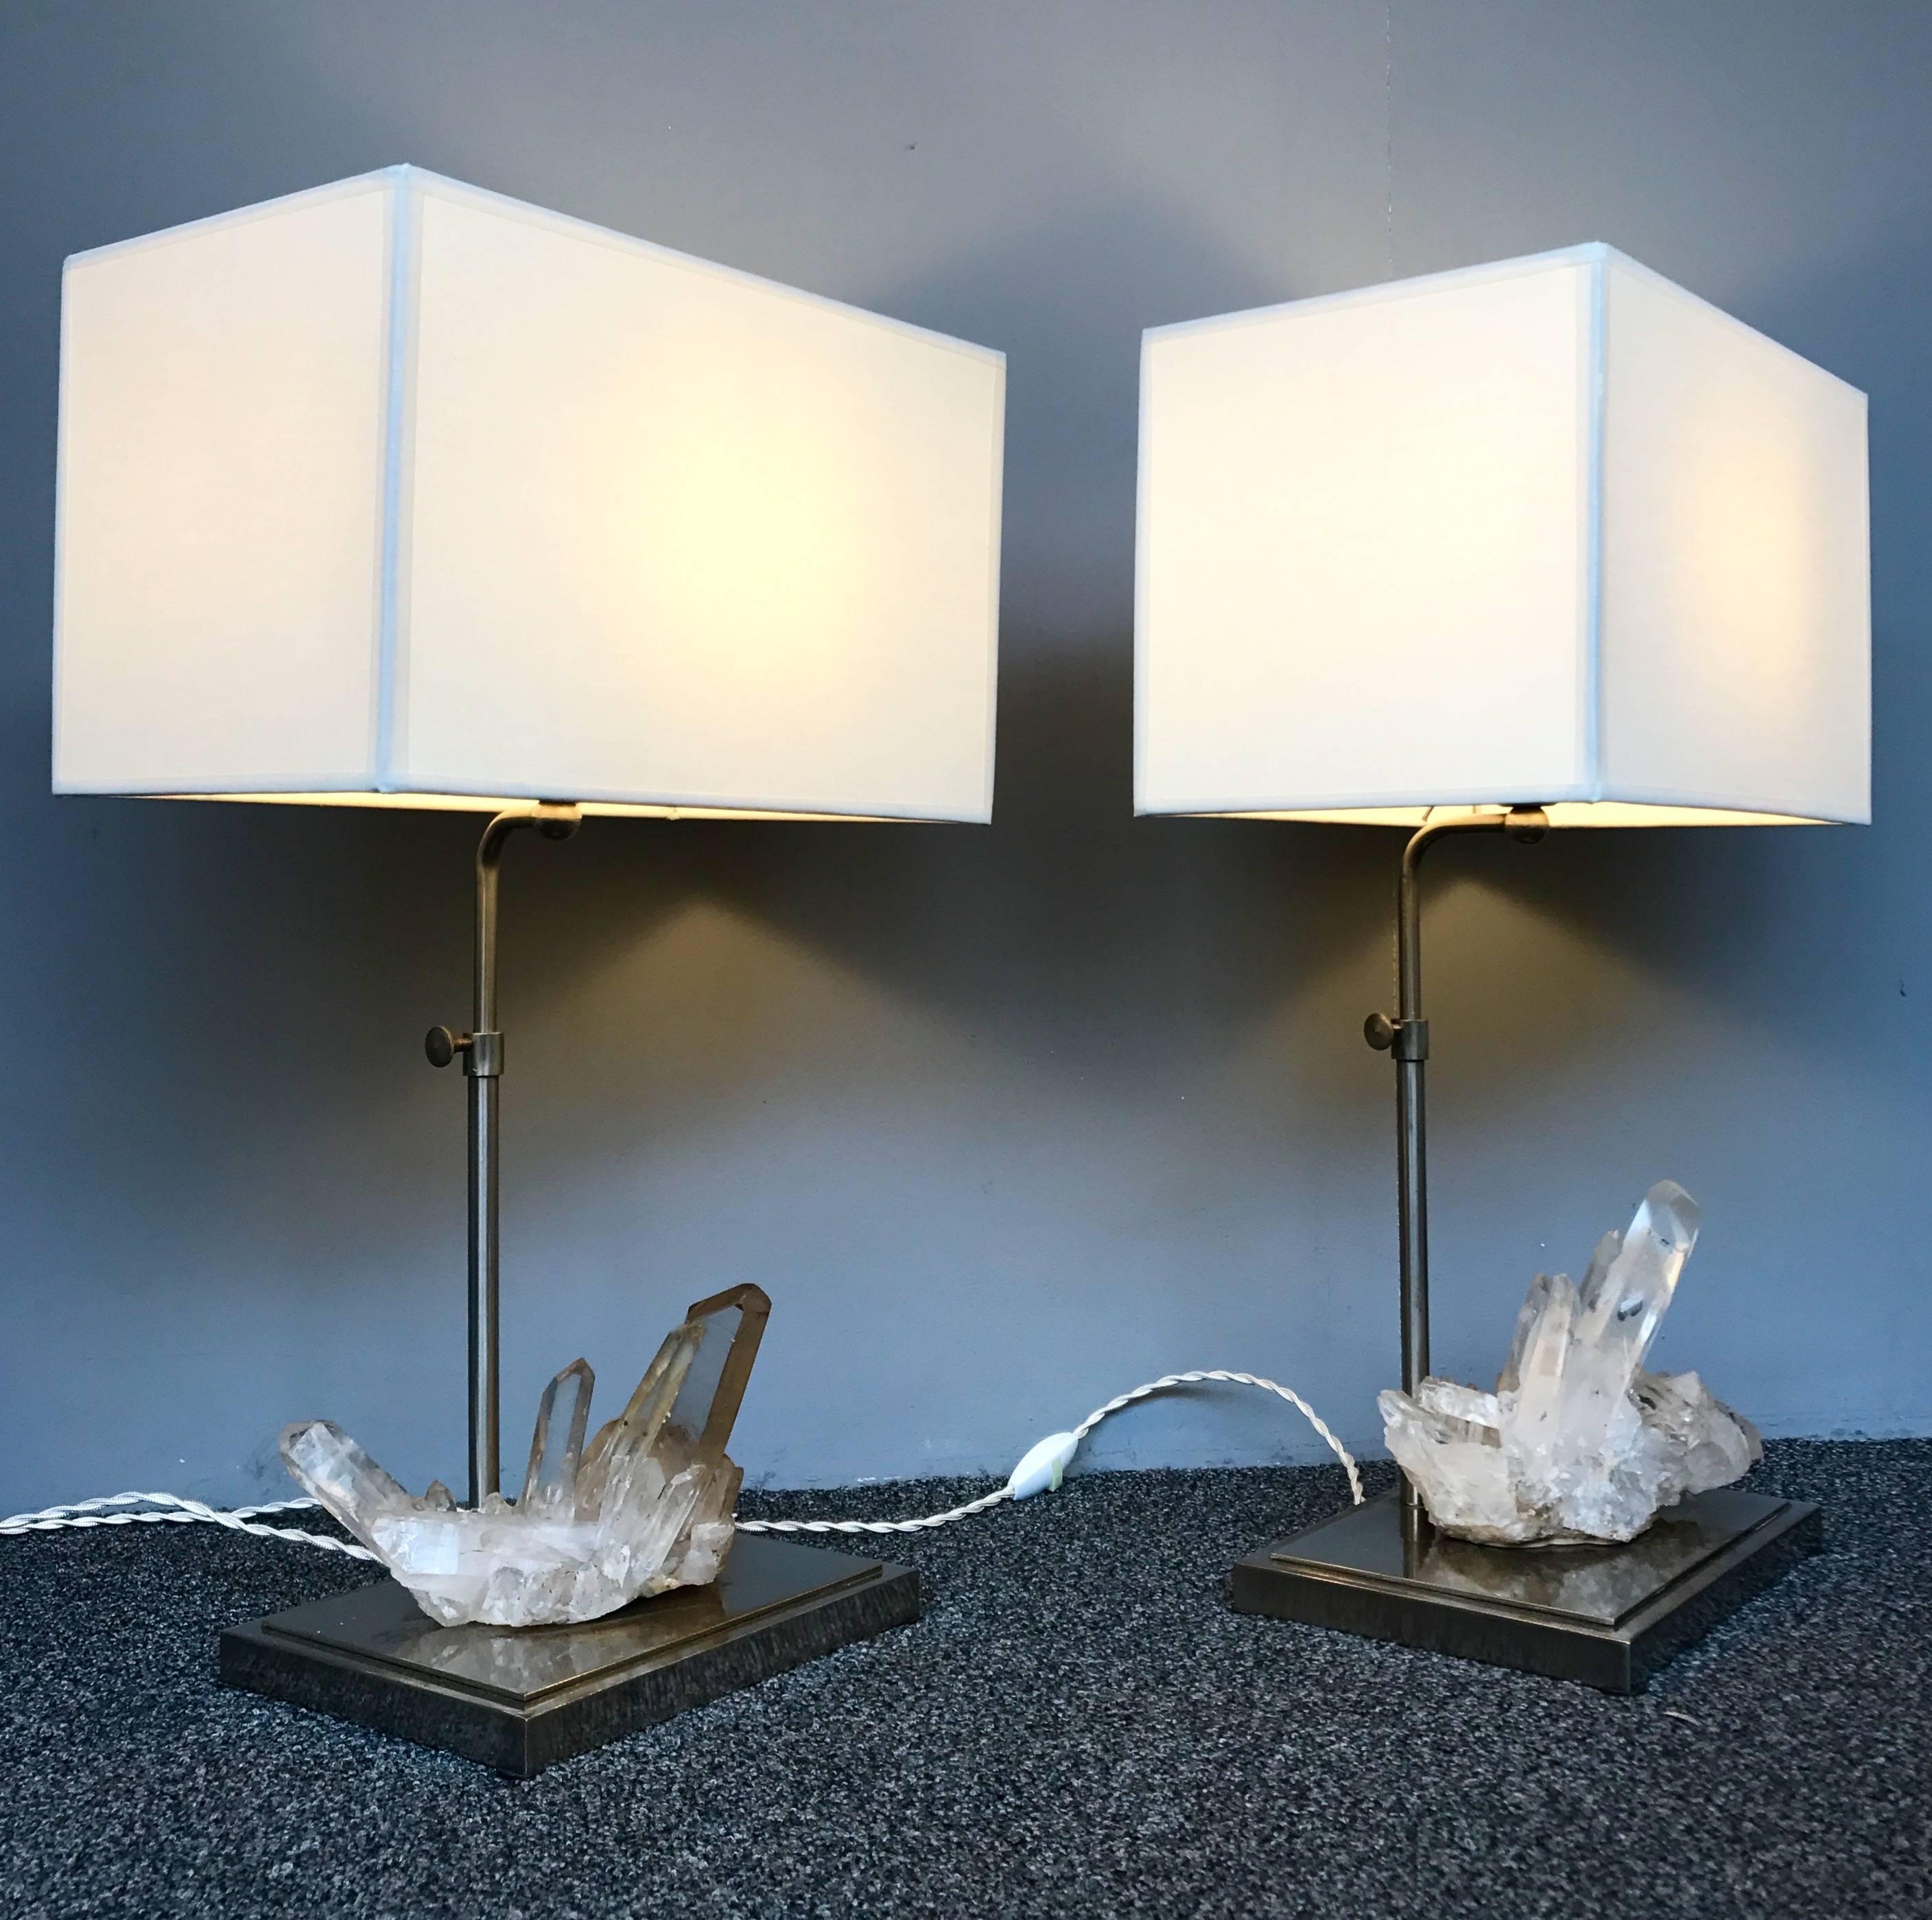 Elegant pair of lamps, nice rock crystal quartz natural stone. Perfect lampshade. Lamps manufacturing typical of the 1970s in a curiosity cabinet spirit. Height adjustable H 60 cms.